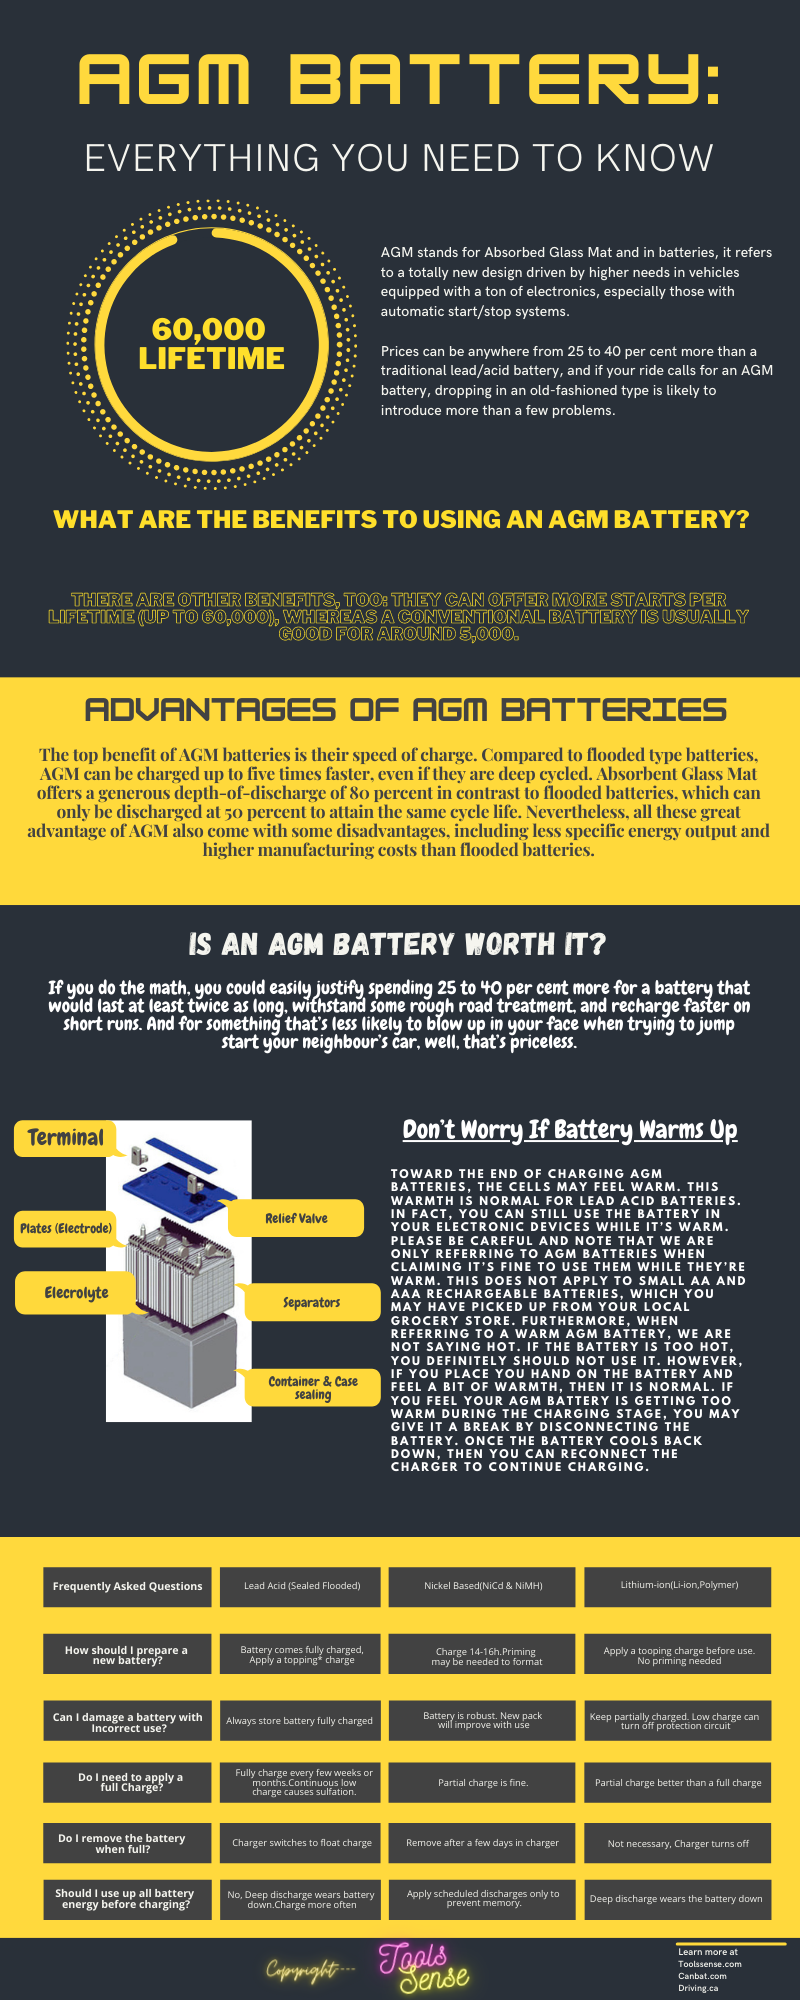 AGM Battery- Everything you need to know